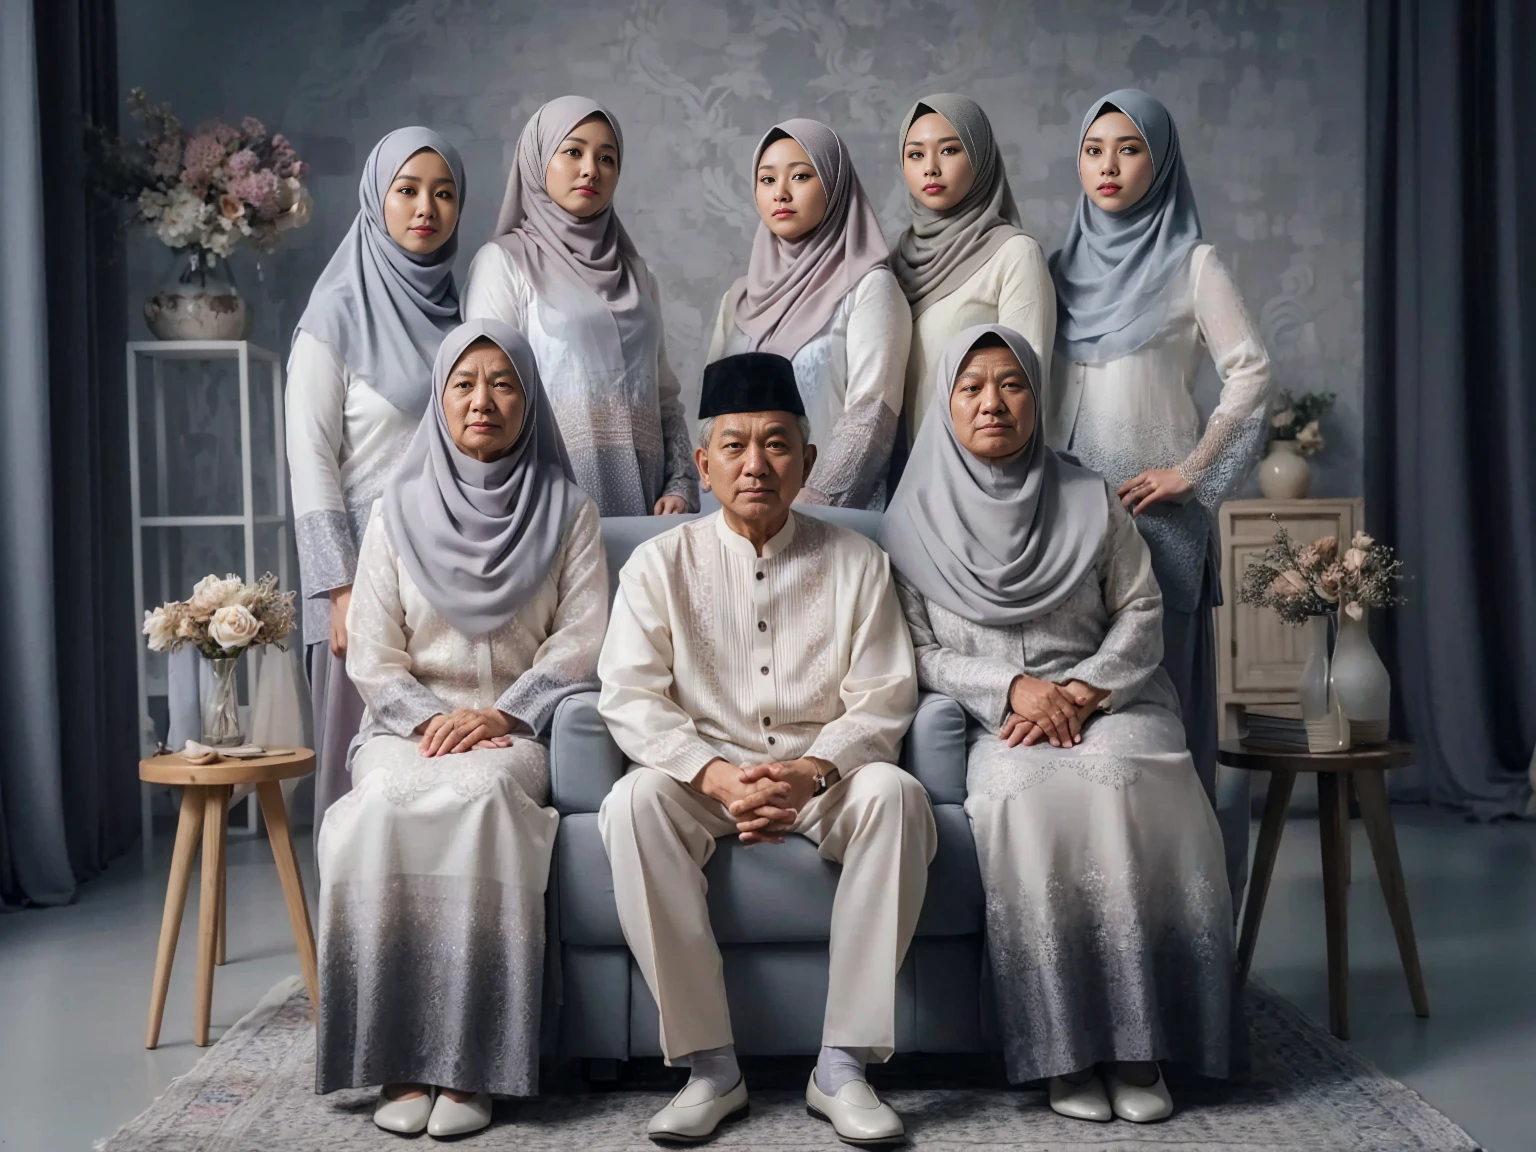 Indoor portrait, close up, Indonesians, 8 members, one man aged 60 wearing cap and slightly overweight woman aged 60 sits on recliner chair, standing behind them there's 6 woman each aged 36, 34, 30, 27, 24, 16, all wearing white gradients grey traditional kurung melayu glossy suit and kurung melayu gamis dress with long compliant pashmina hijab, sets at studio with grey floral patterned wall, flower vases, side tables, fresh colors, good lighting photography, 8K, UHD